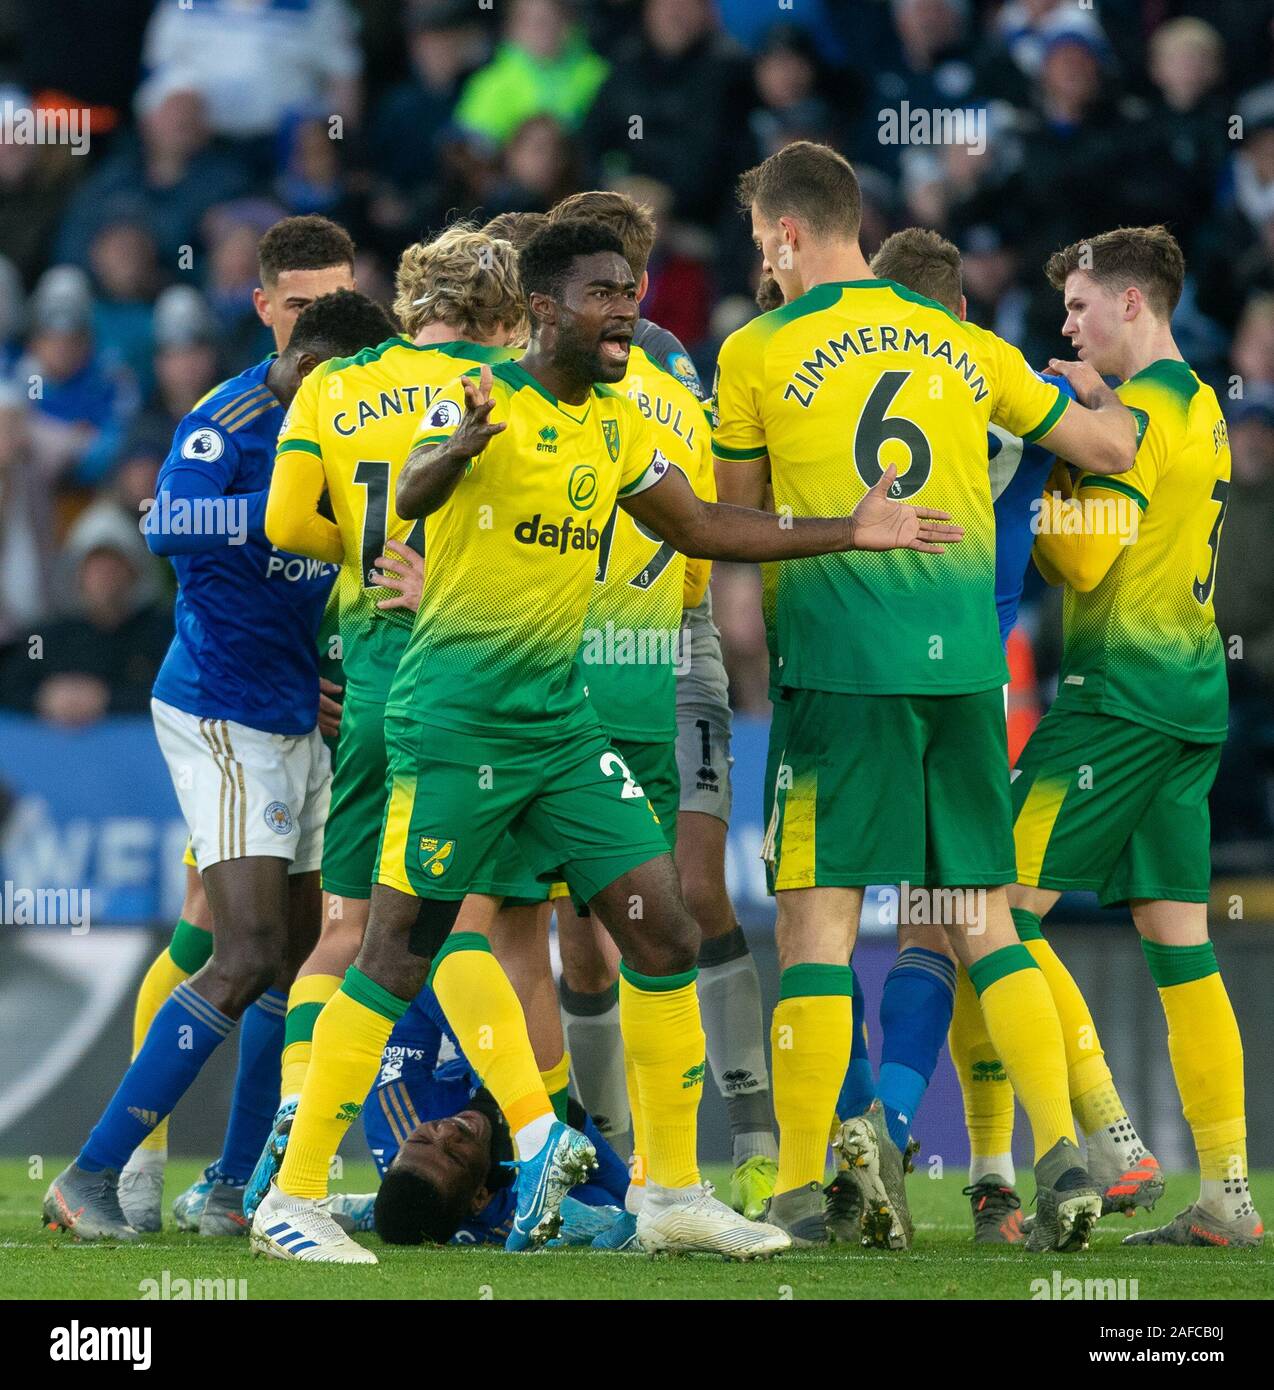 Leicester, UK. 14th Dec, 2019. scenes after Kelechi Iheanacho of Leicester City attacks after Norwich City knocked the ball out of play so a player could receive treatment during the Premier League match between Leicester City and Norwich City at the King Power Stadium, Leicester, England on 14 December 2019. Photo by Andy Rowland. Credit: PRiME Media Images/Alamy Live News Stock Photo